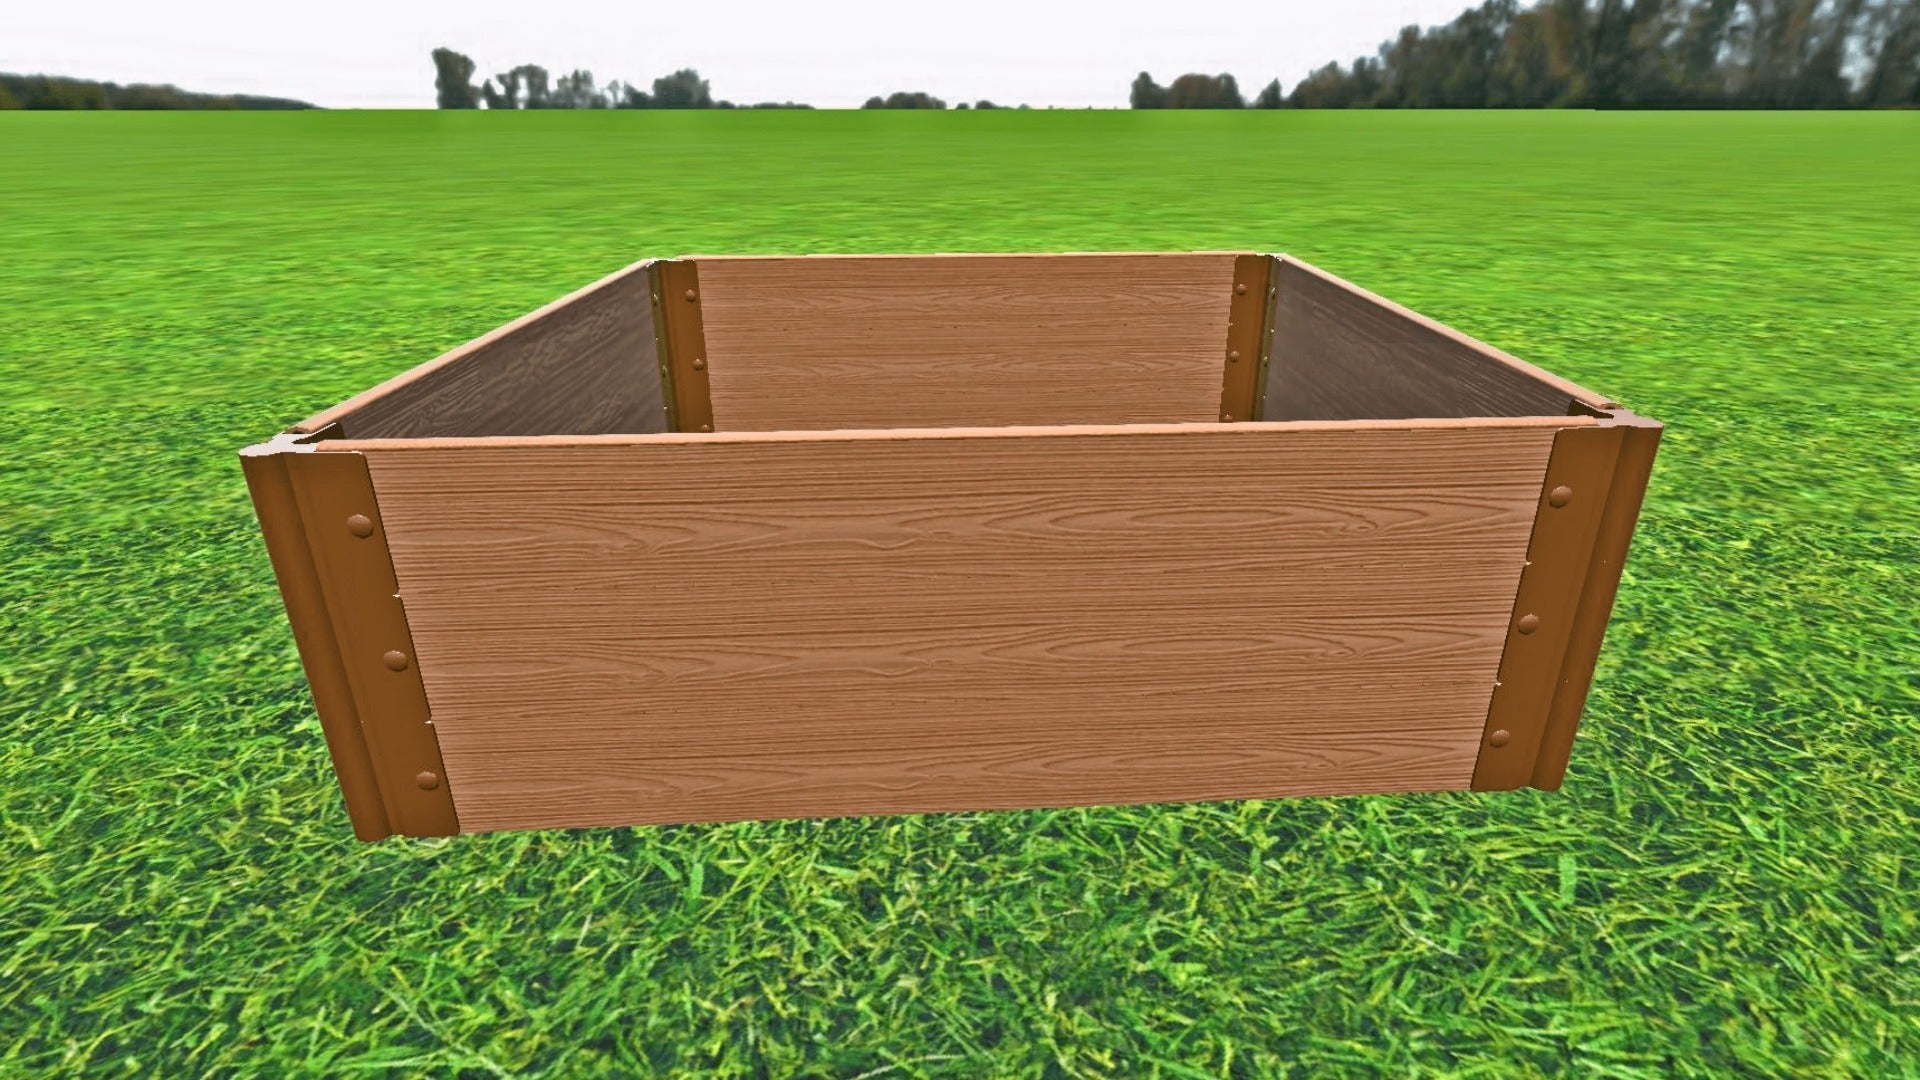 Tool-Free 4' x 4' Raised Garden Bed Raised Garden Beds Frame It All Classic Sienna 1